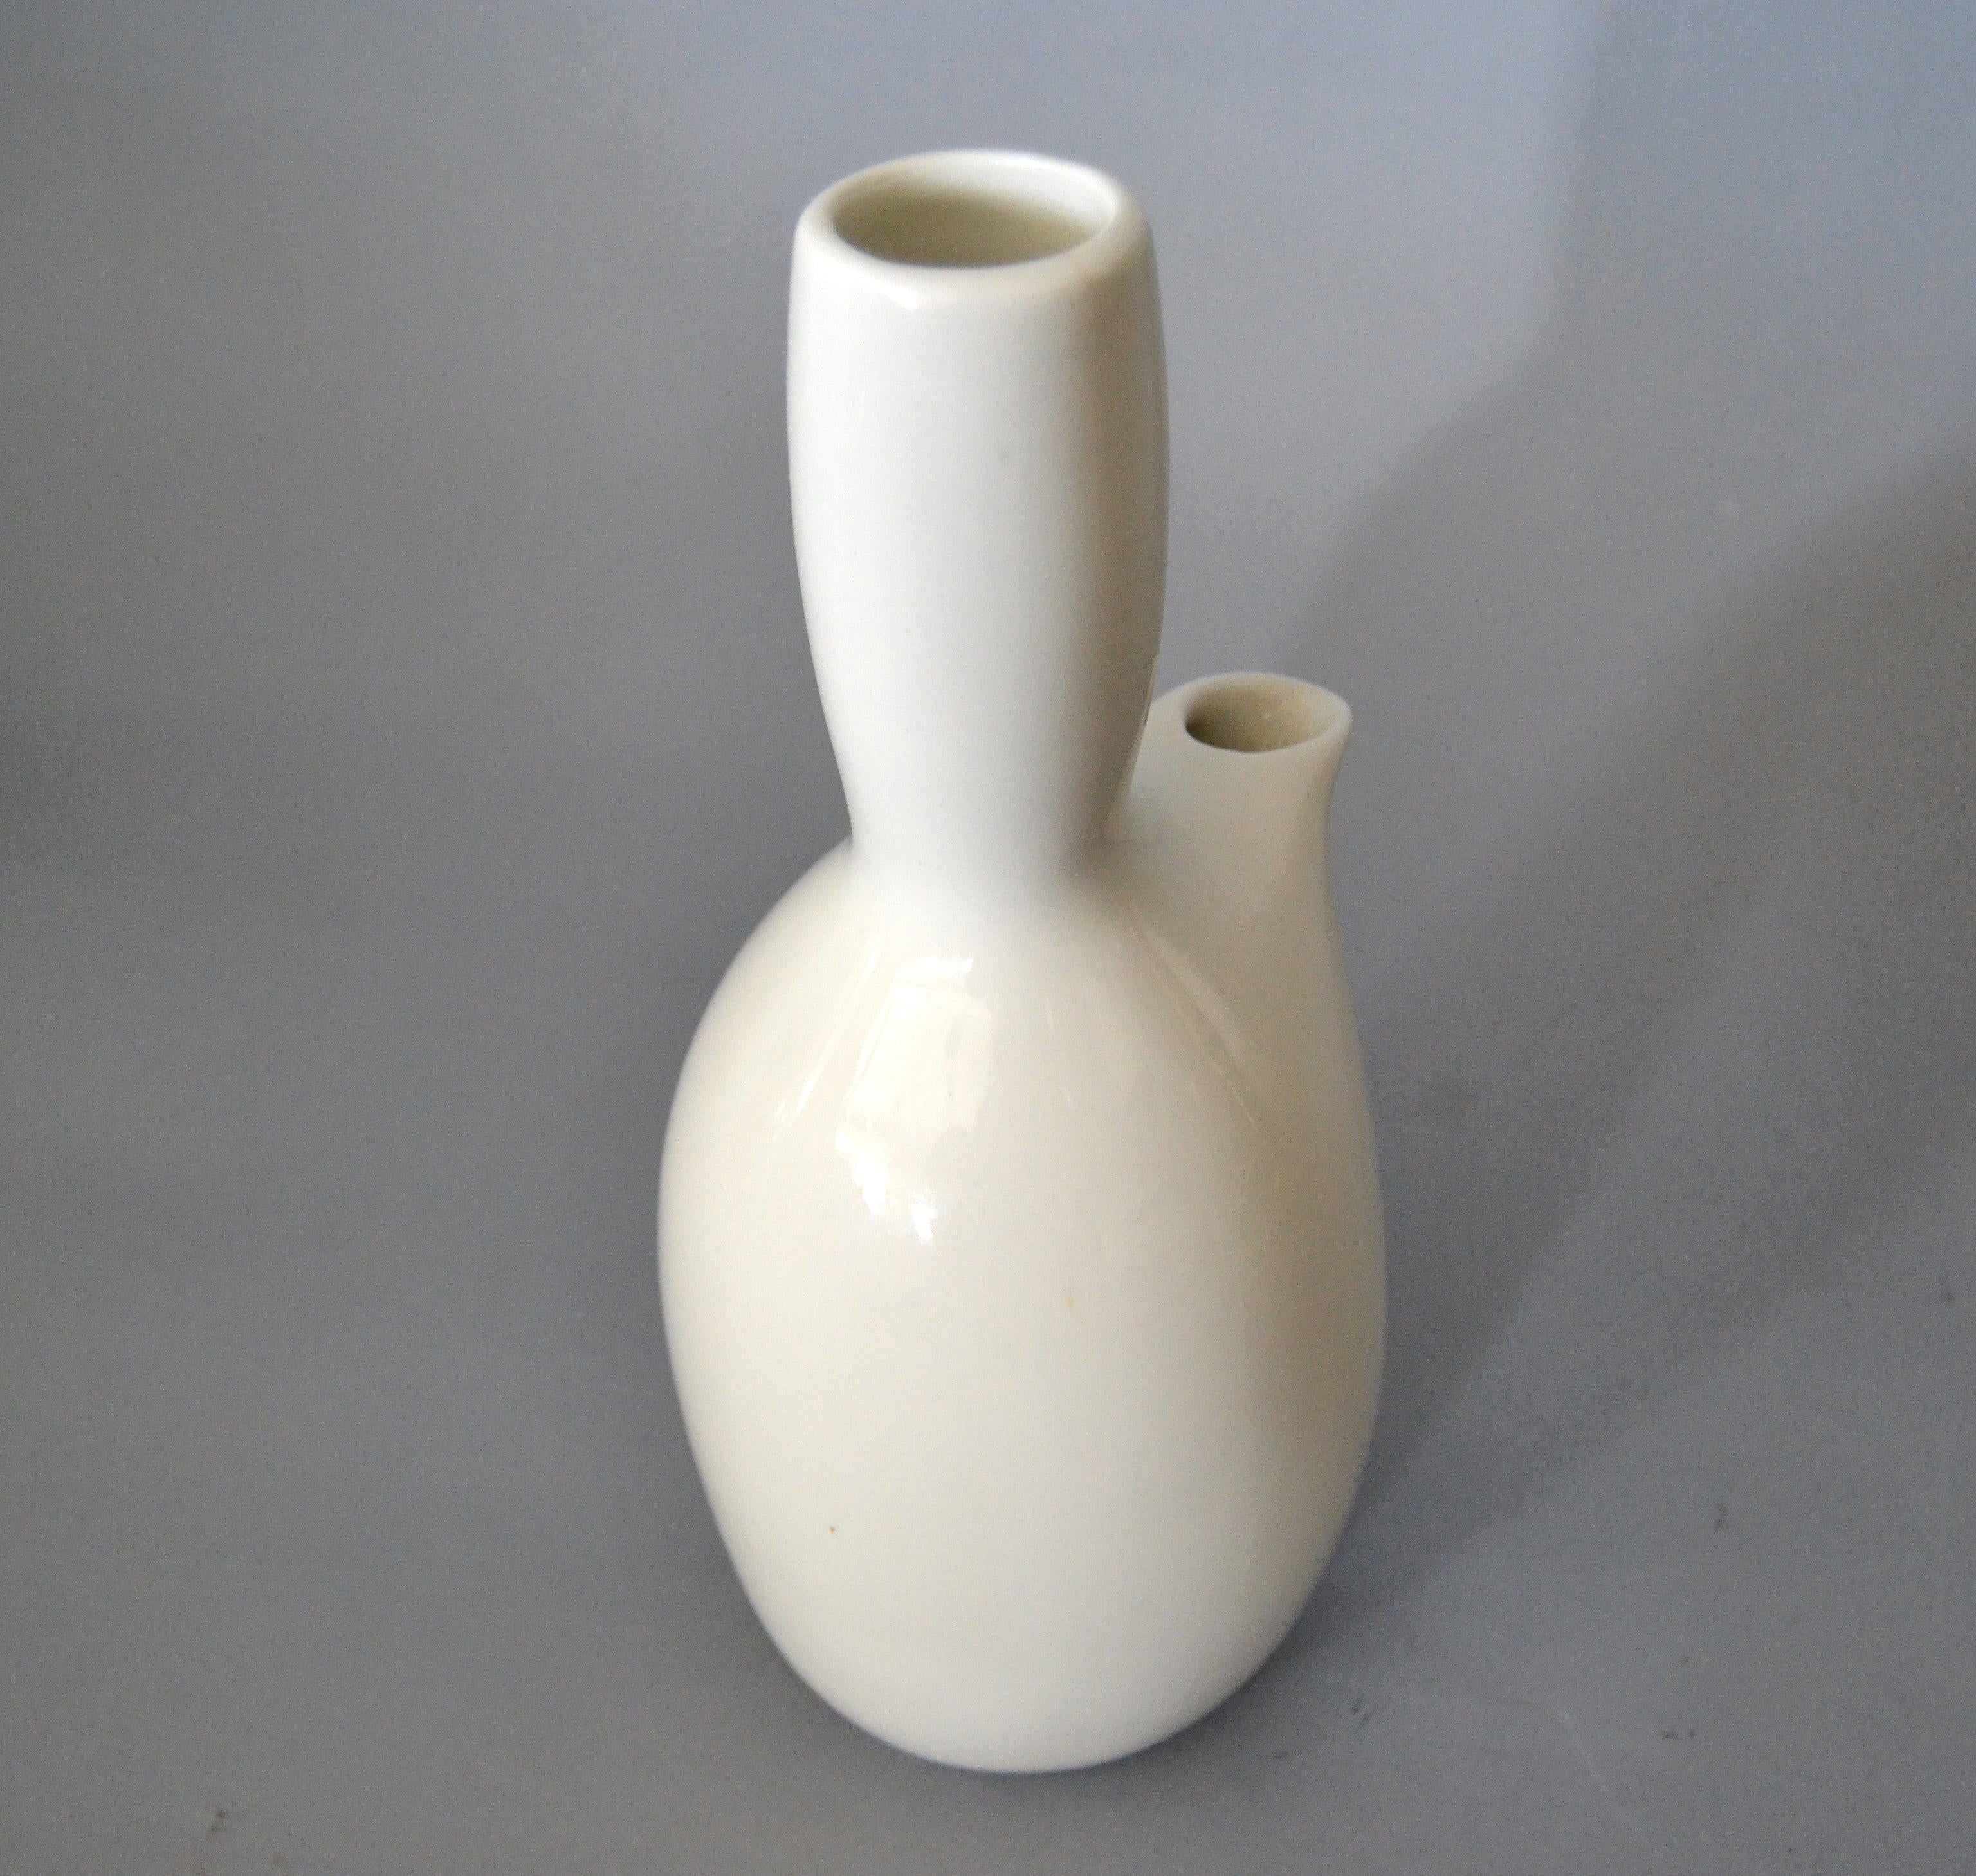 American Modern Iroquois White Porcelain Carafe Russel Wright for Bauer Pottery 1